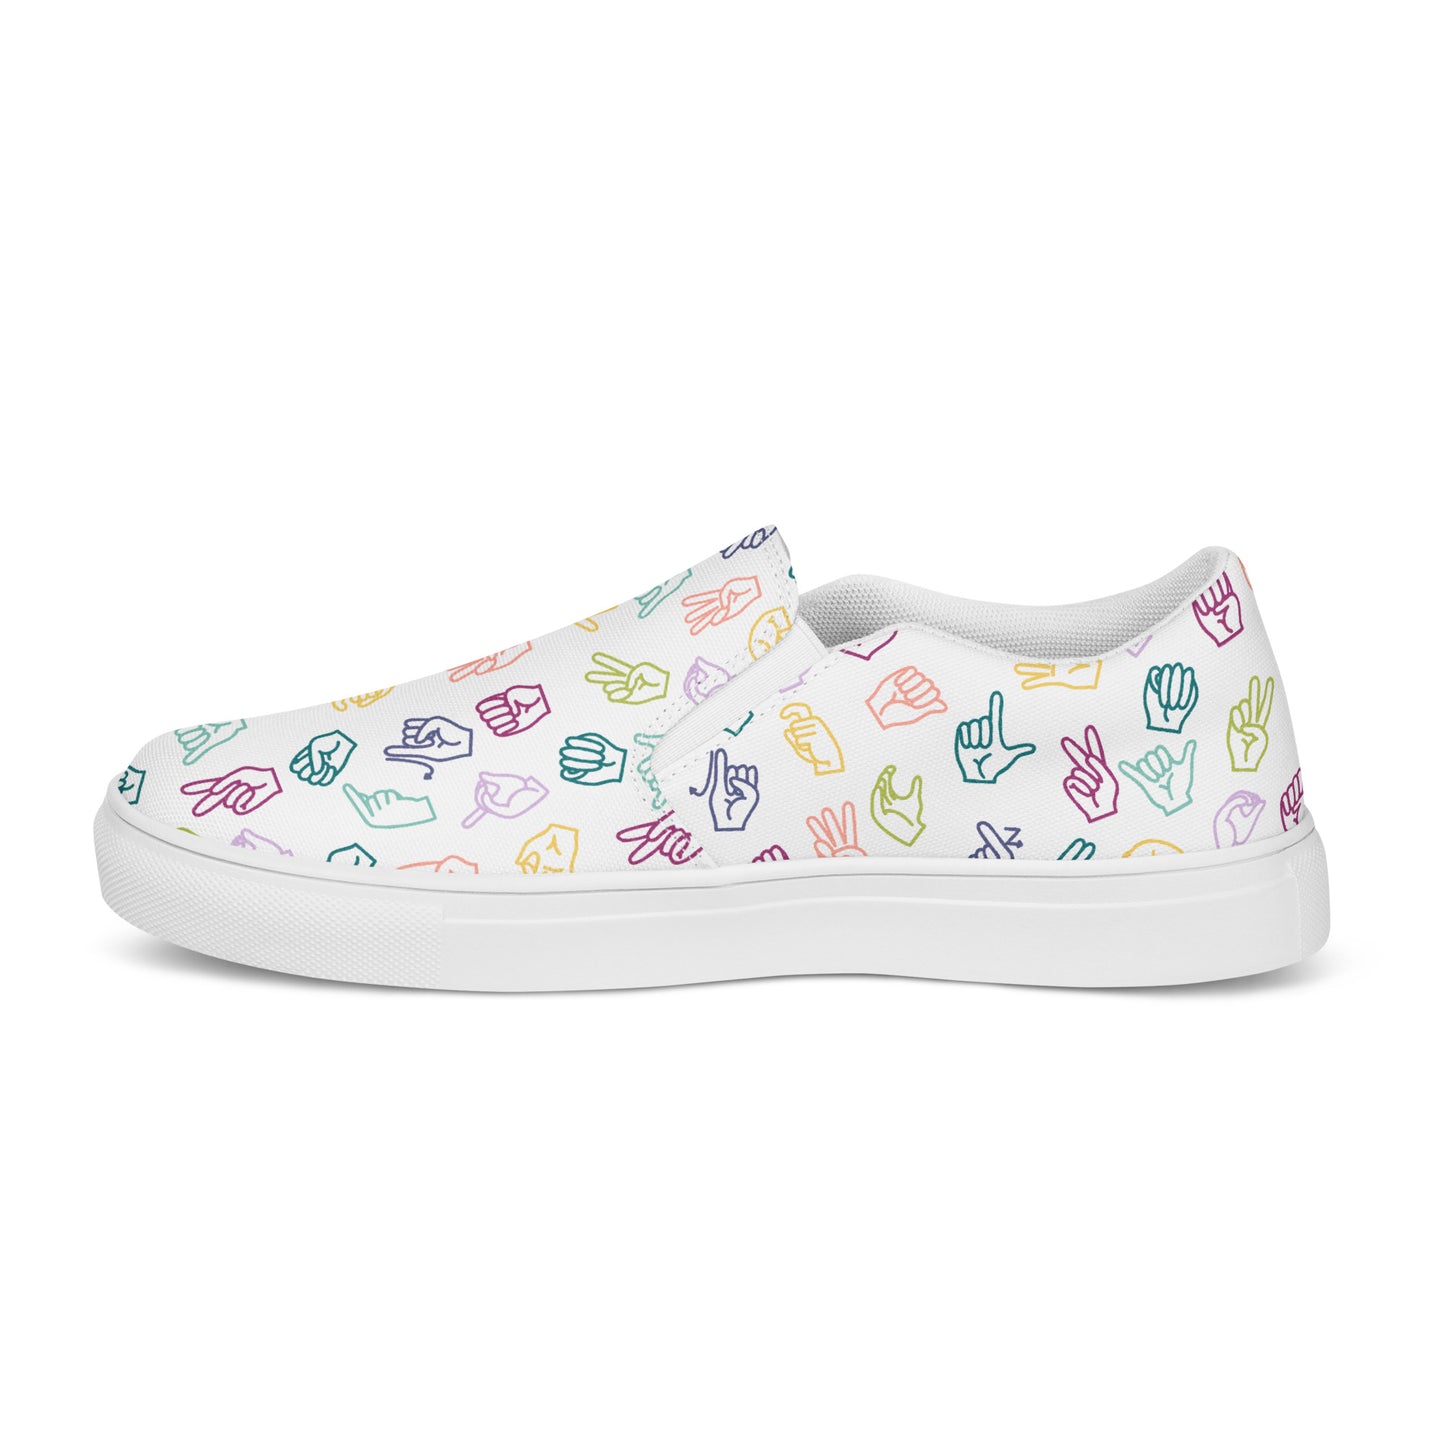 Muted Rainbow ASL Slip-on Canvas Shoes (Women's Sizes)